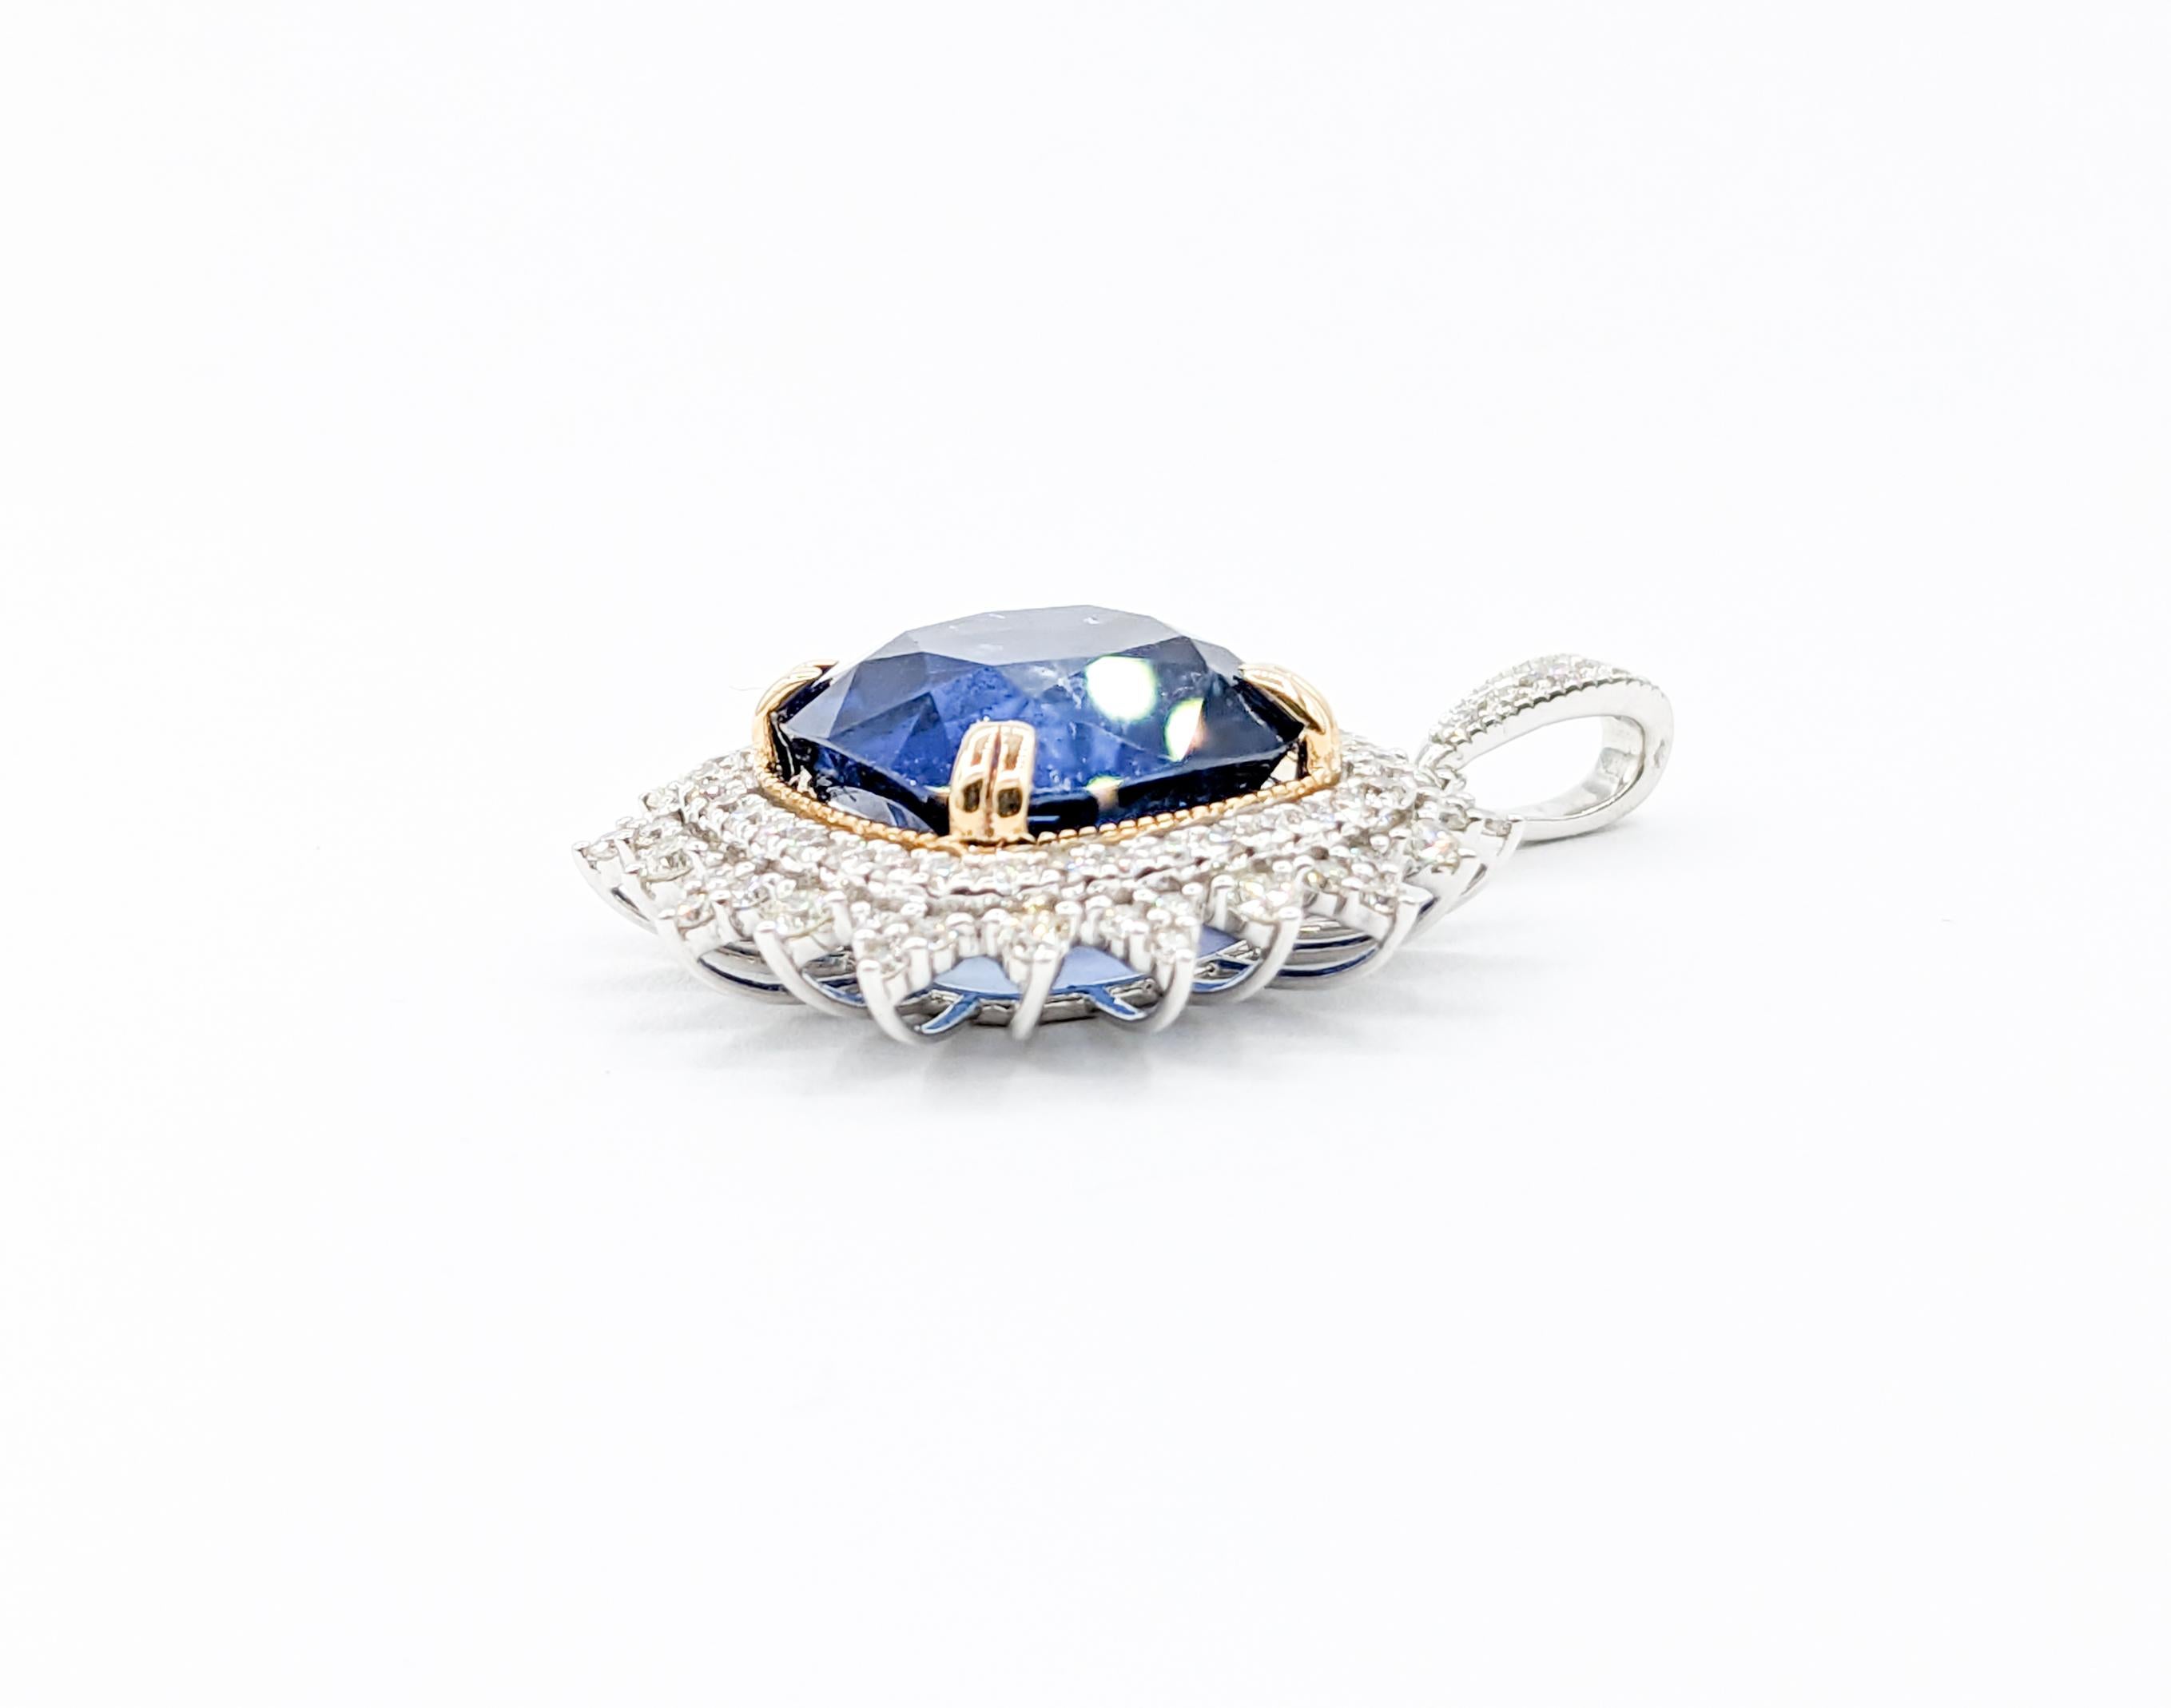 Stunning Large Sapphire Pendant with Diamond Halo in 14kt White Gold

Introducing a breathtaking Sapphire pendant, exquisitely crafted in 14kw White Gold, showcasing 1.22ctw of Diamonds. These radiant diamonds exhibit SI clarity and a near colorless